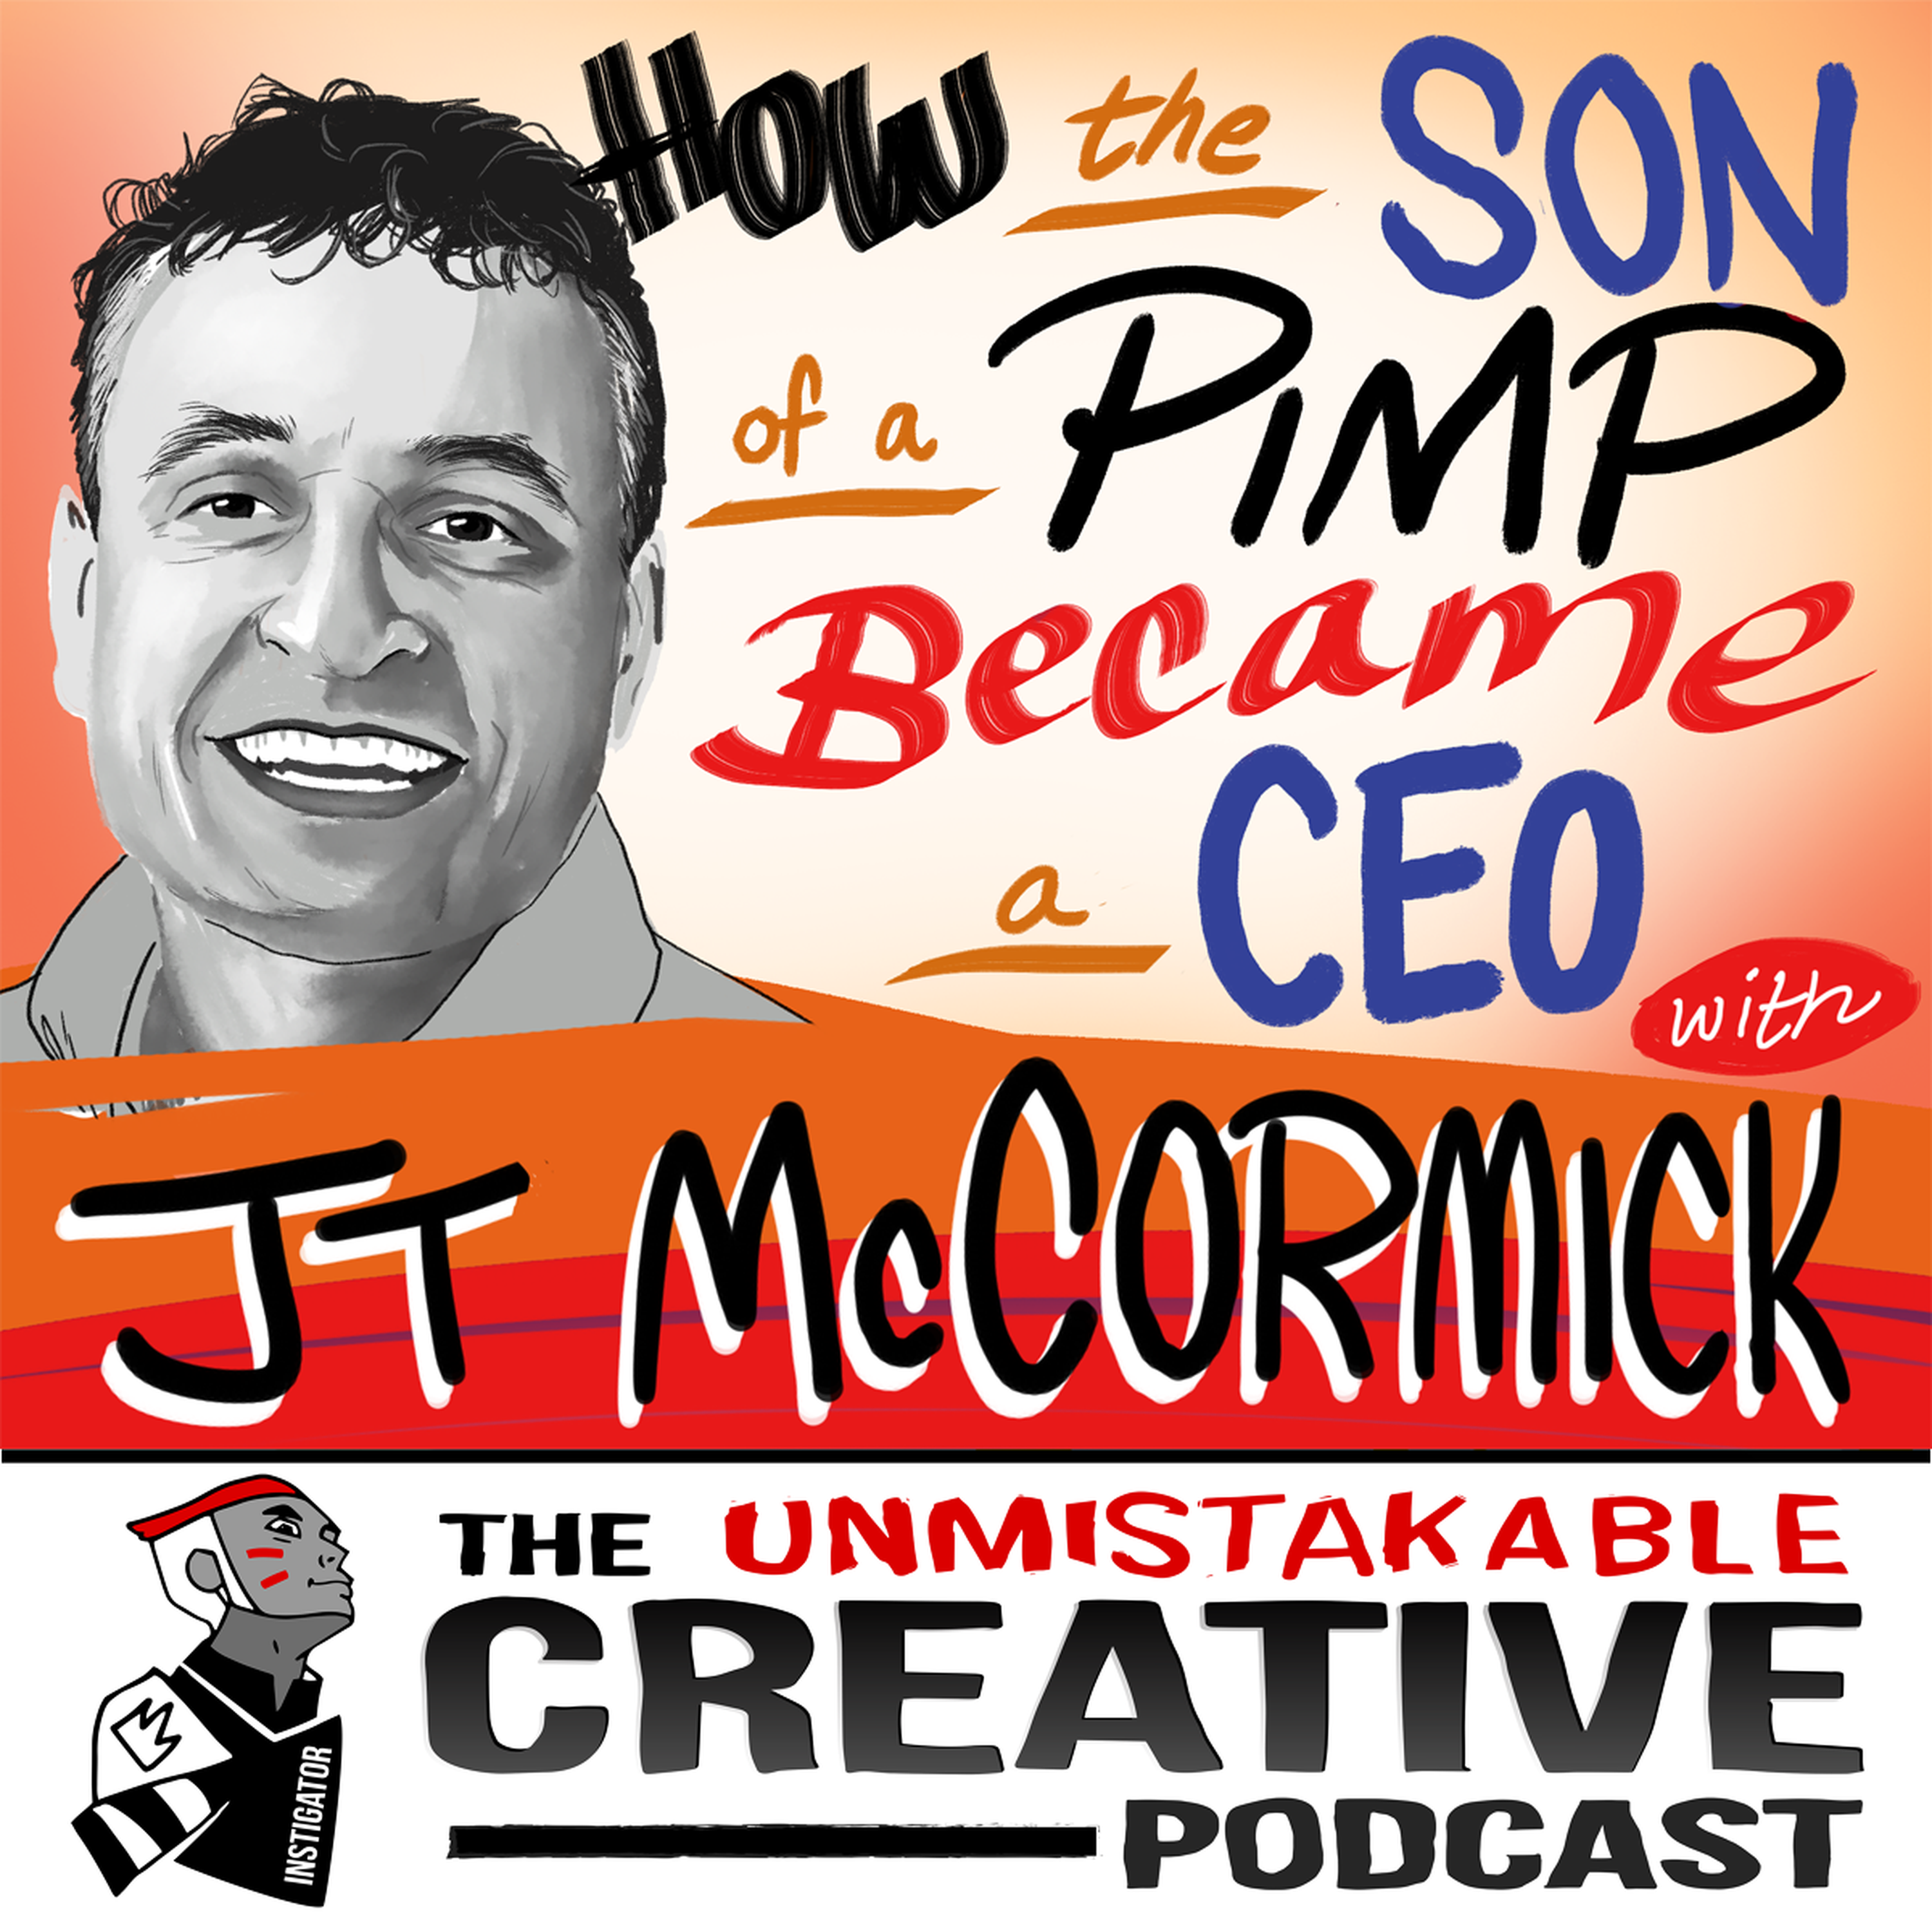 JT McCormick: How the Son of Pimp Became a CEO Image